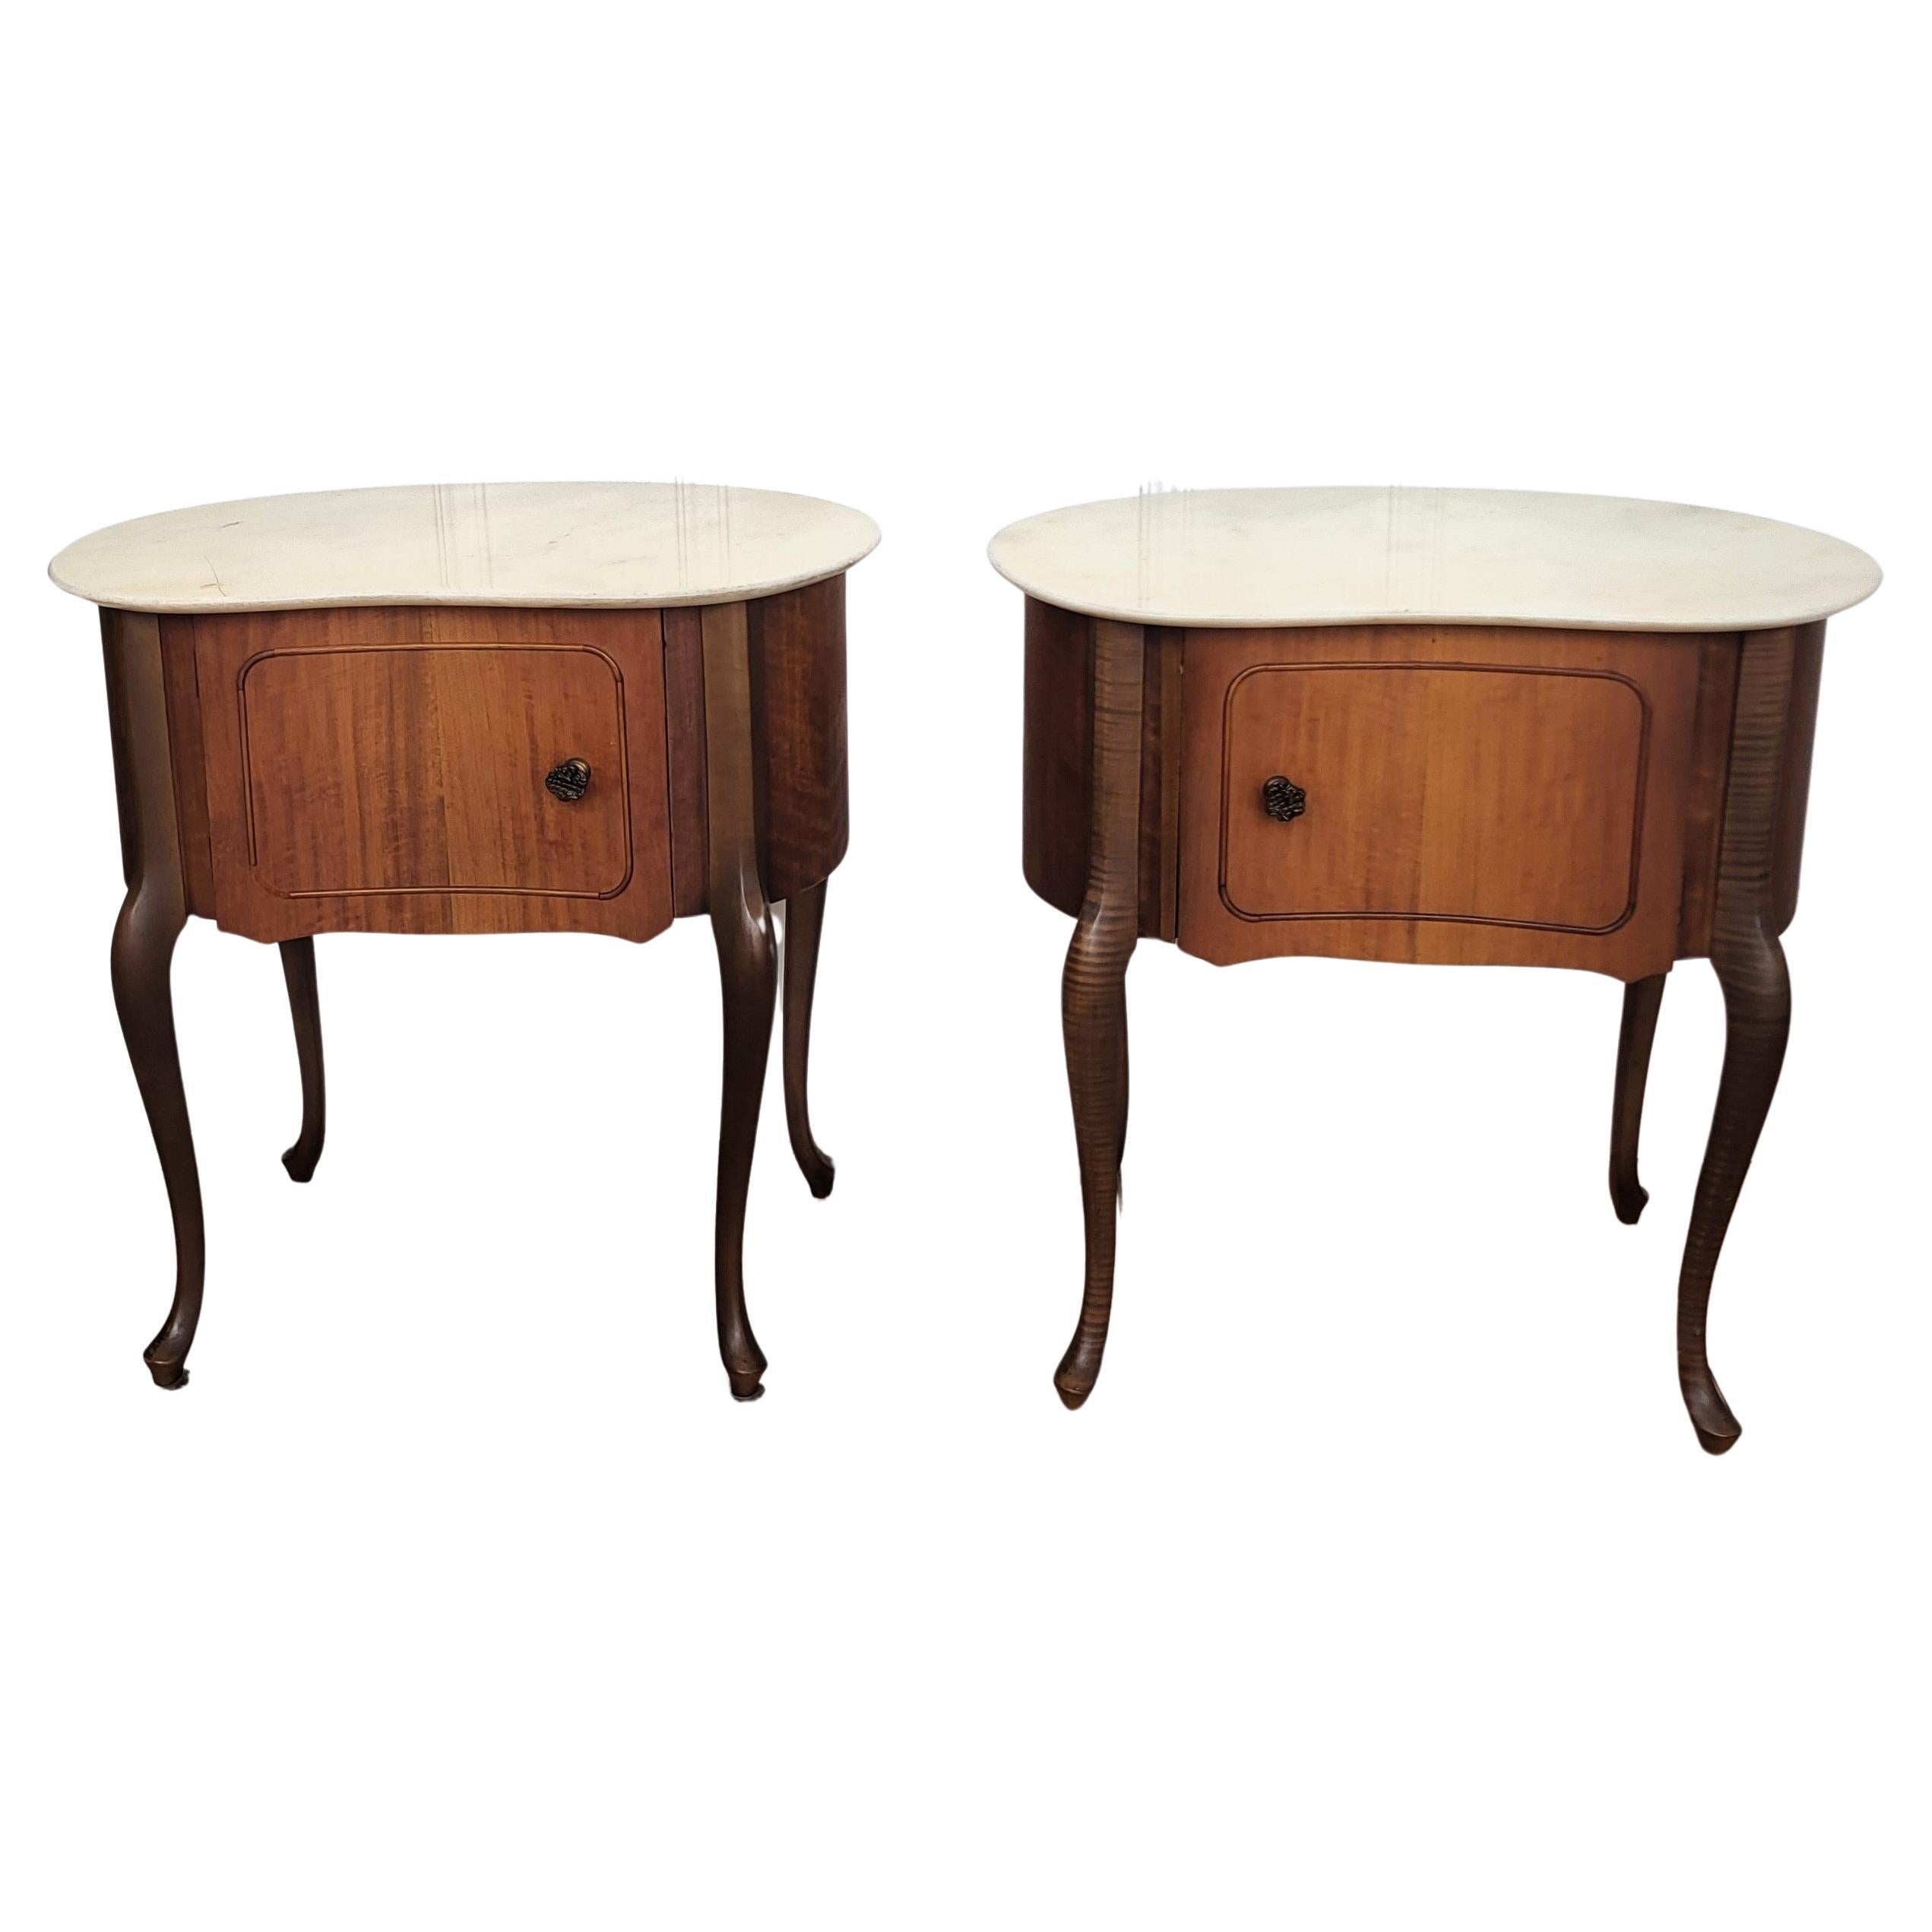 Pair of Italian Art Deco Kidney Shaped Night Stands Bedside Tables Marble Top For Sale